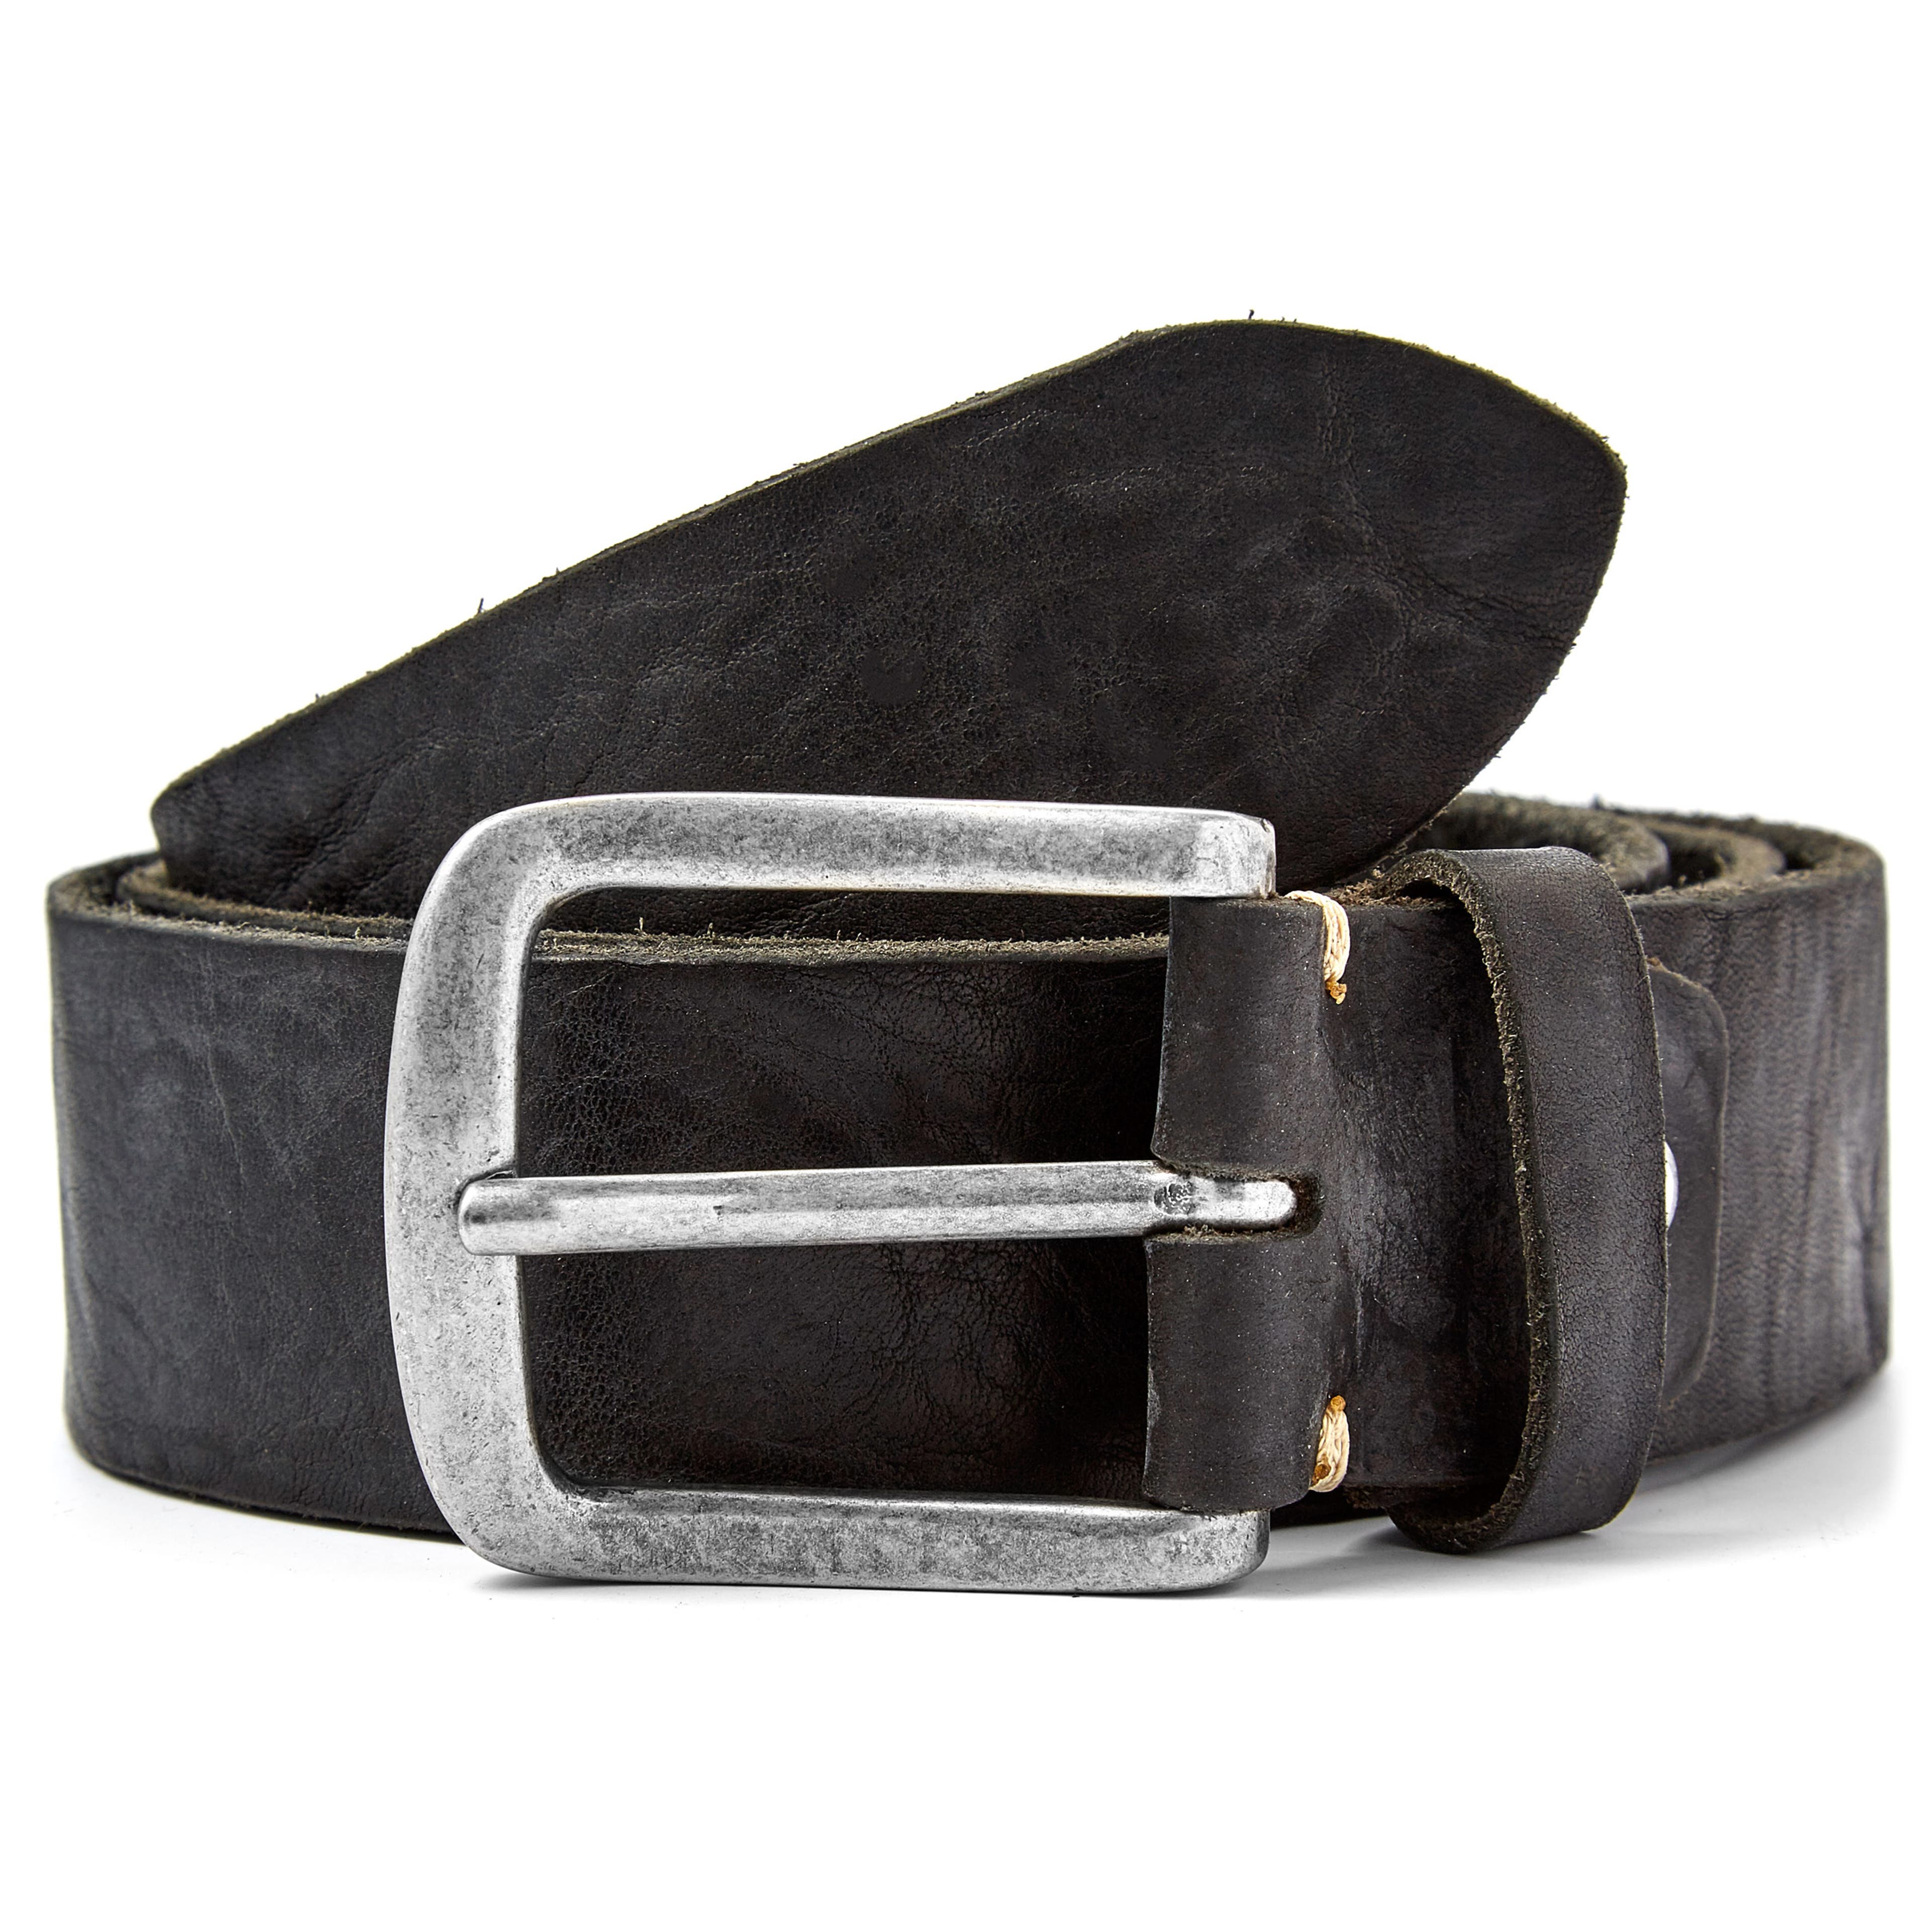 | Distressed Casual Leather Belt stock! BSWK | In Black